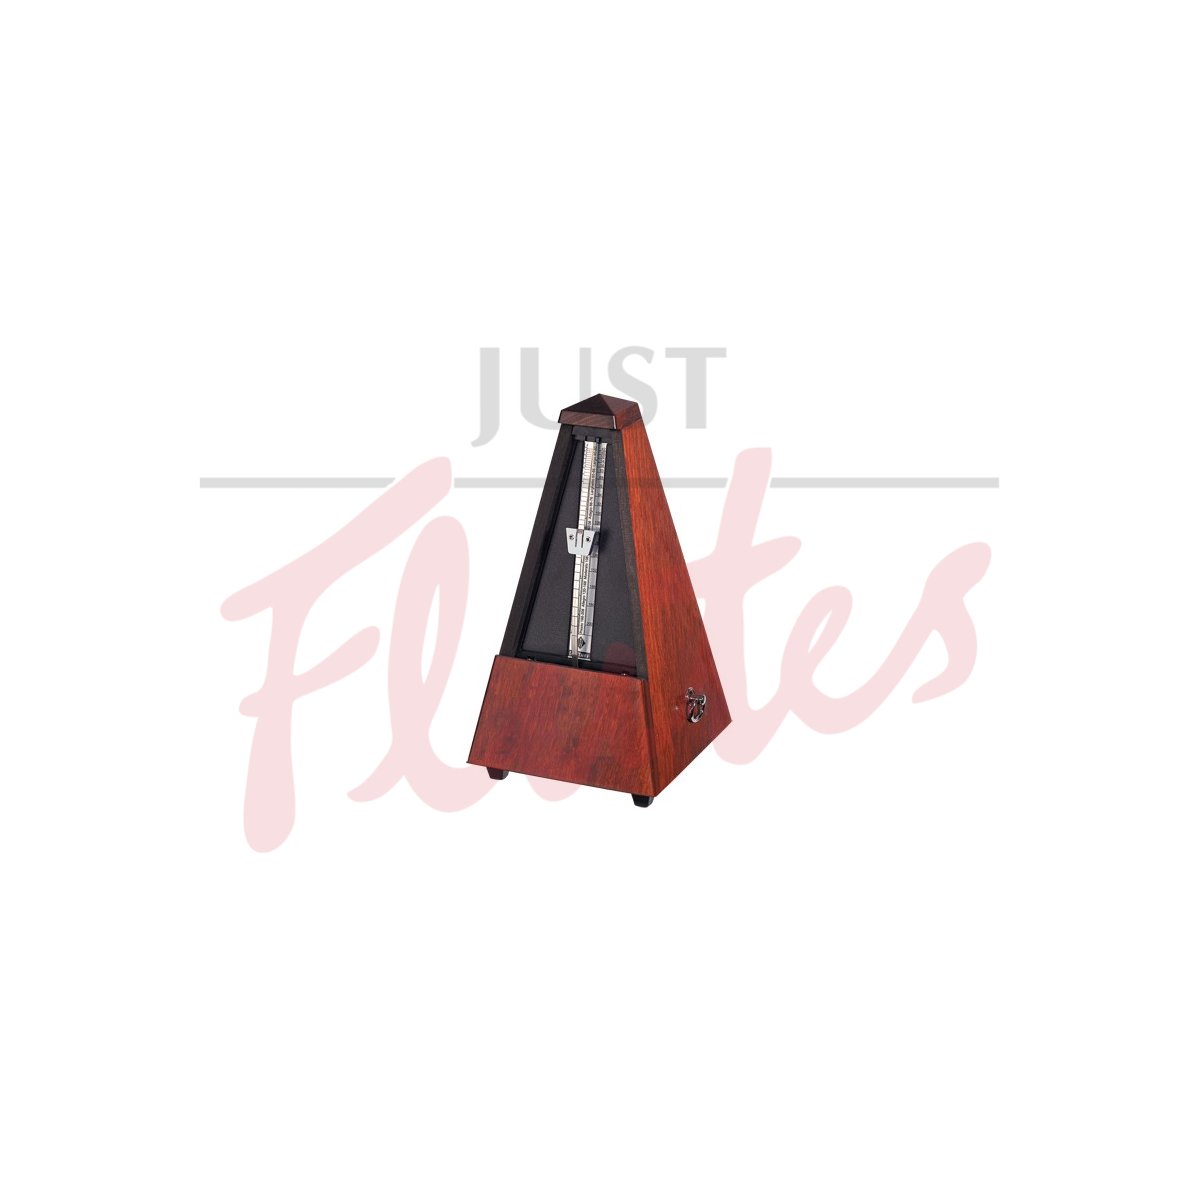 Wittner 811 Pyramid Metronome with Bell, Wood, Highly Polished Mahogany Finish